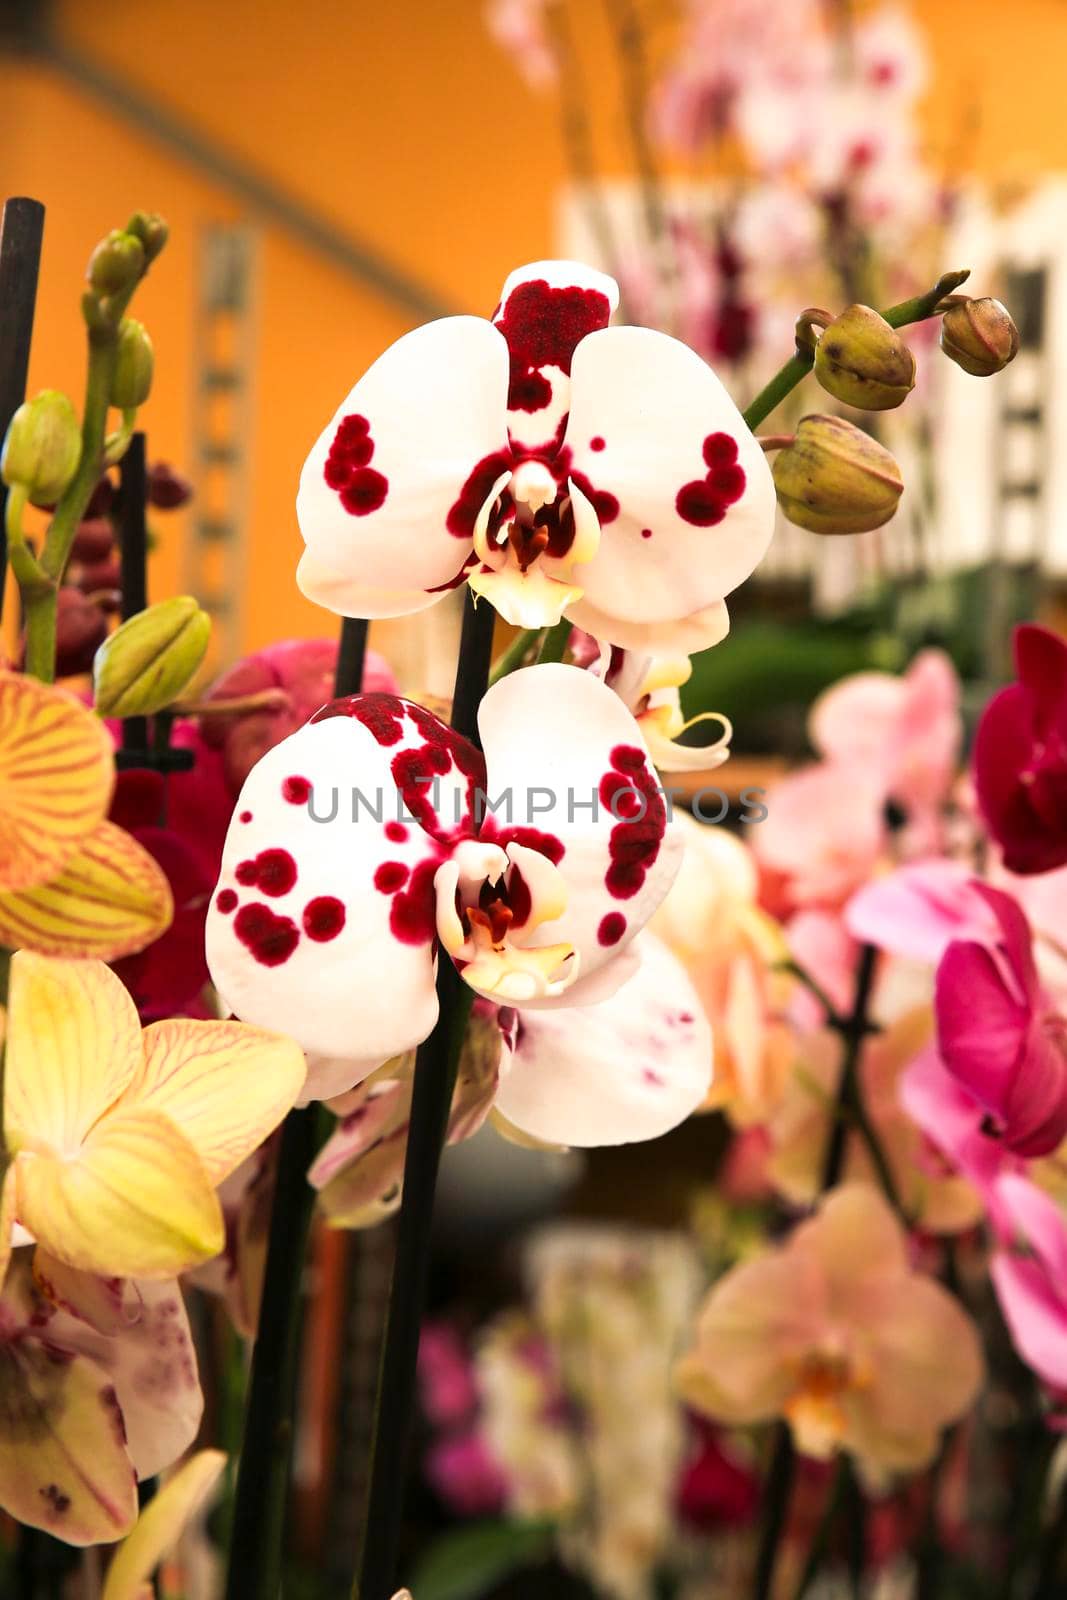 Phalenopsis Orchid plants in the garden in Spring by soniabonet